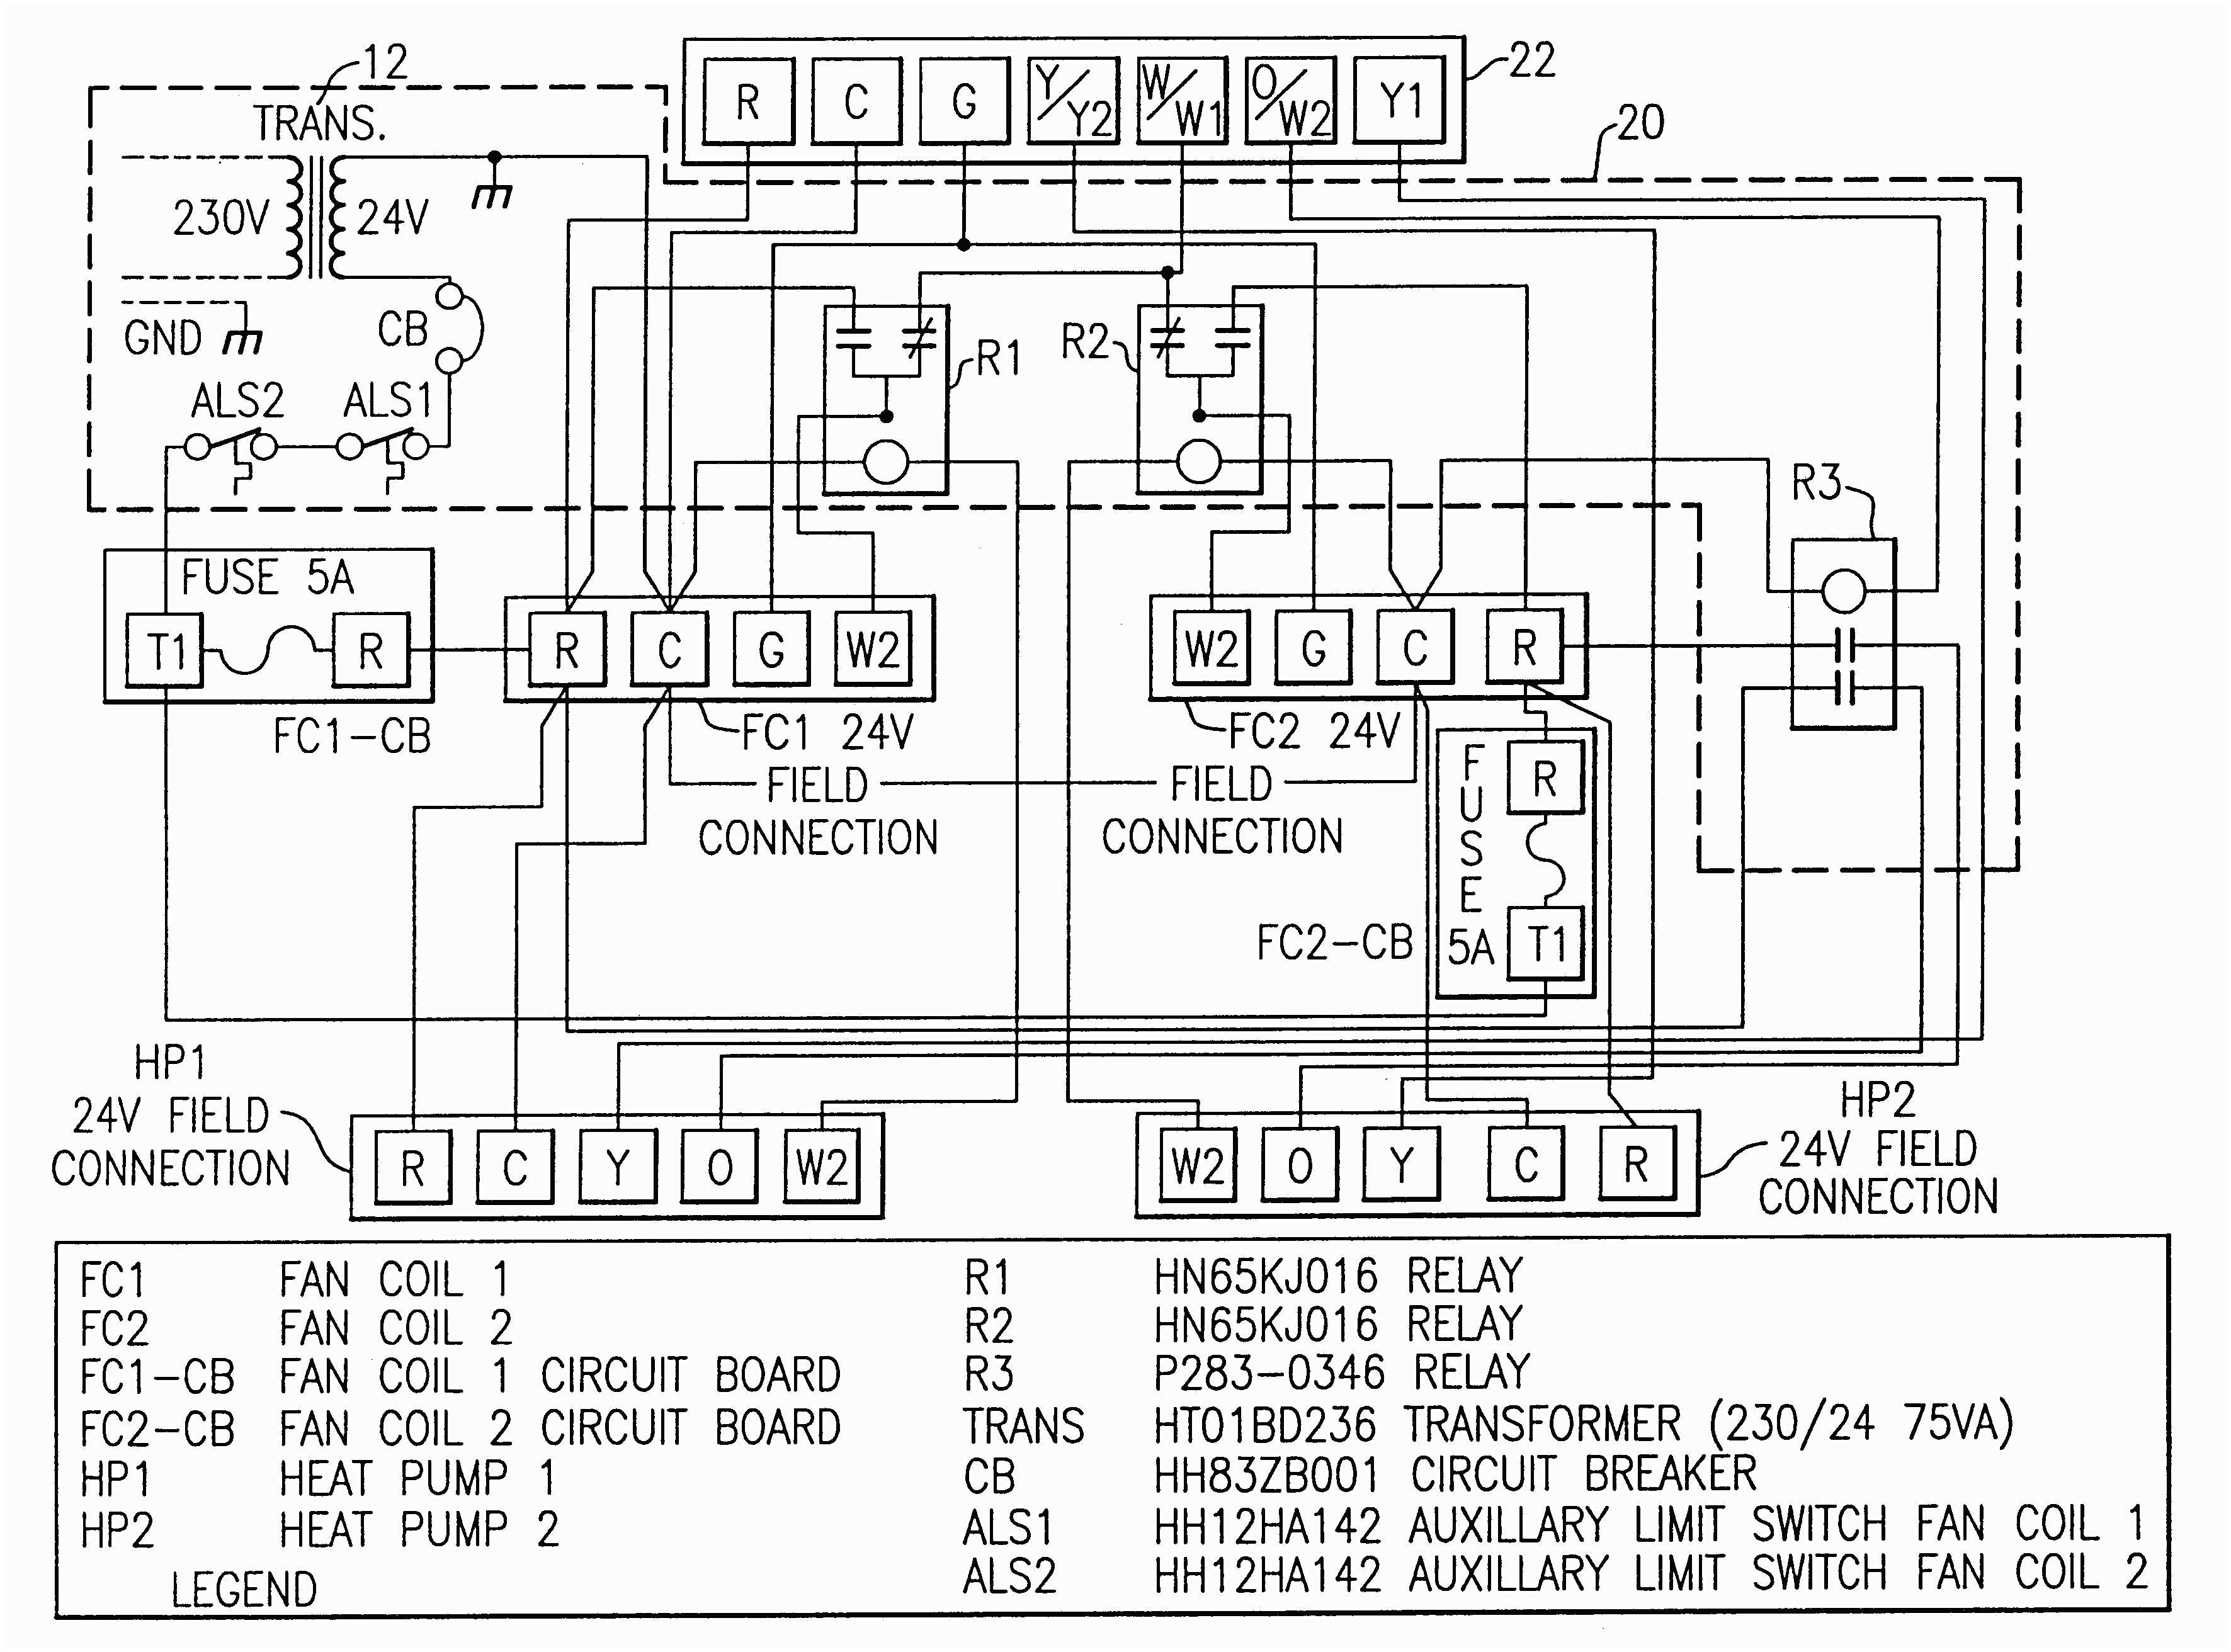 Wiring A Ac thermostat Diagram New Carrier Wiring Diagram 48dp016 Carrier Wiring Diagram